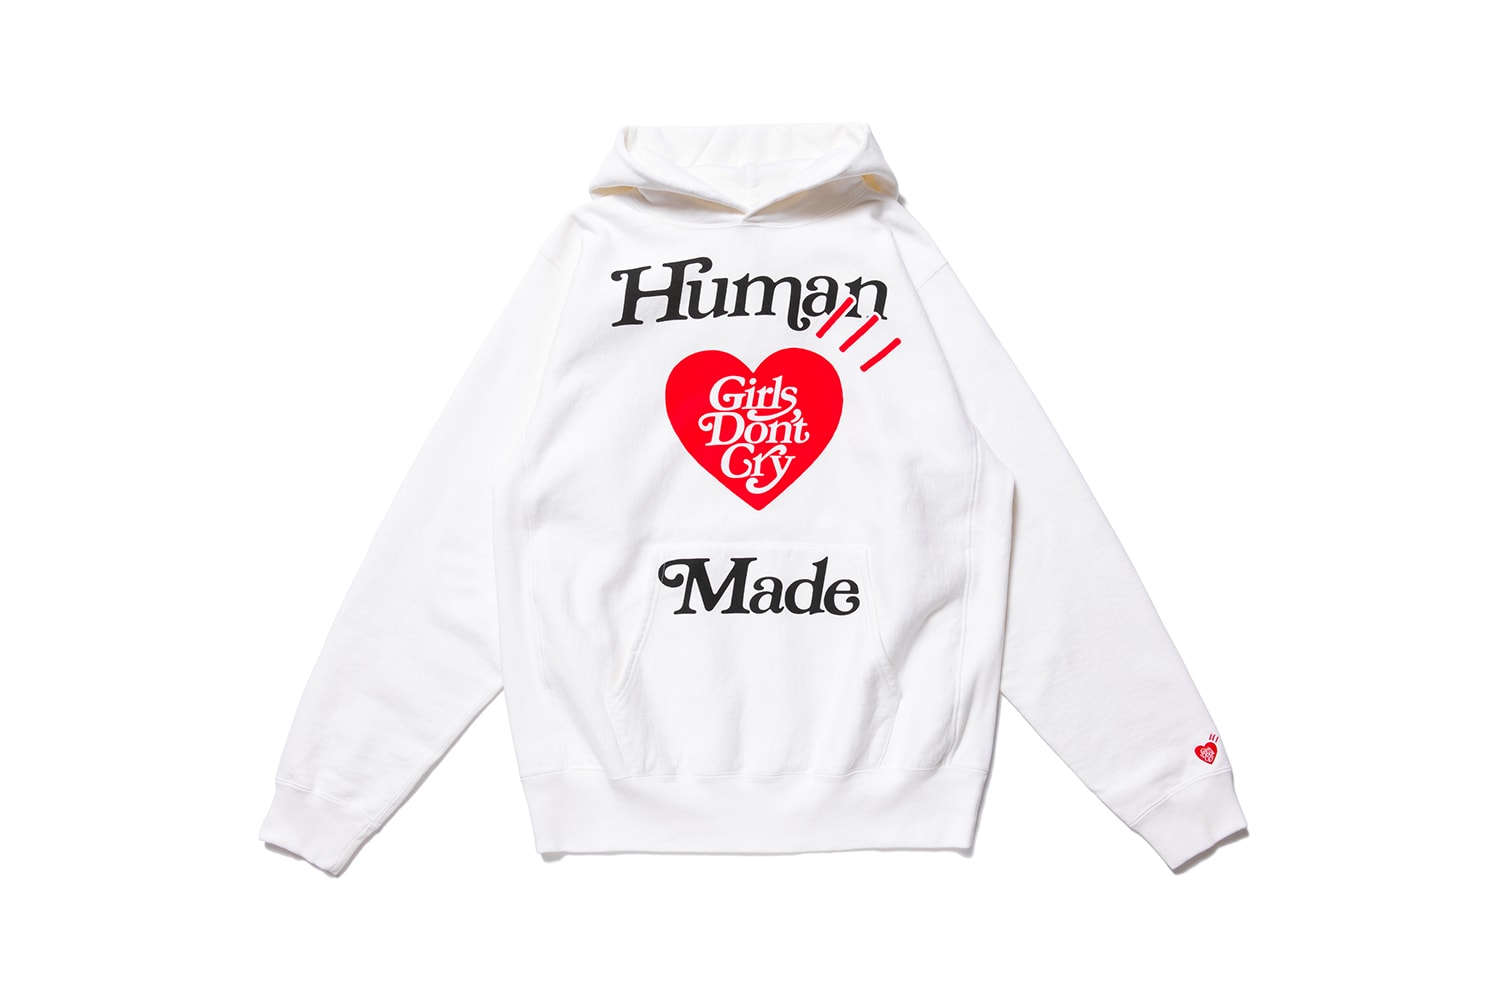 Girls Don't Cry Human Made Verdy Harajuku Day Capsule Release info Date Buy Letterman Jacket Hoodie t shirt Bucket Hat stadium jacket